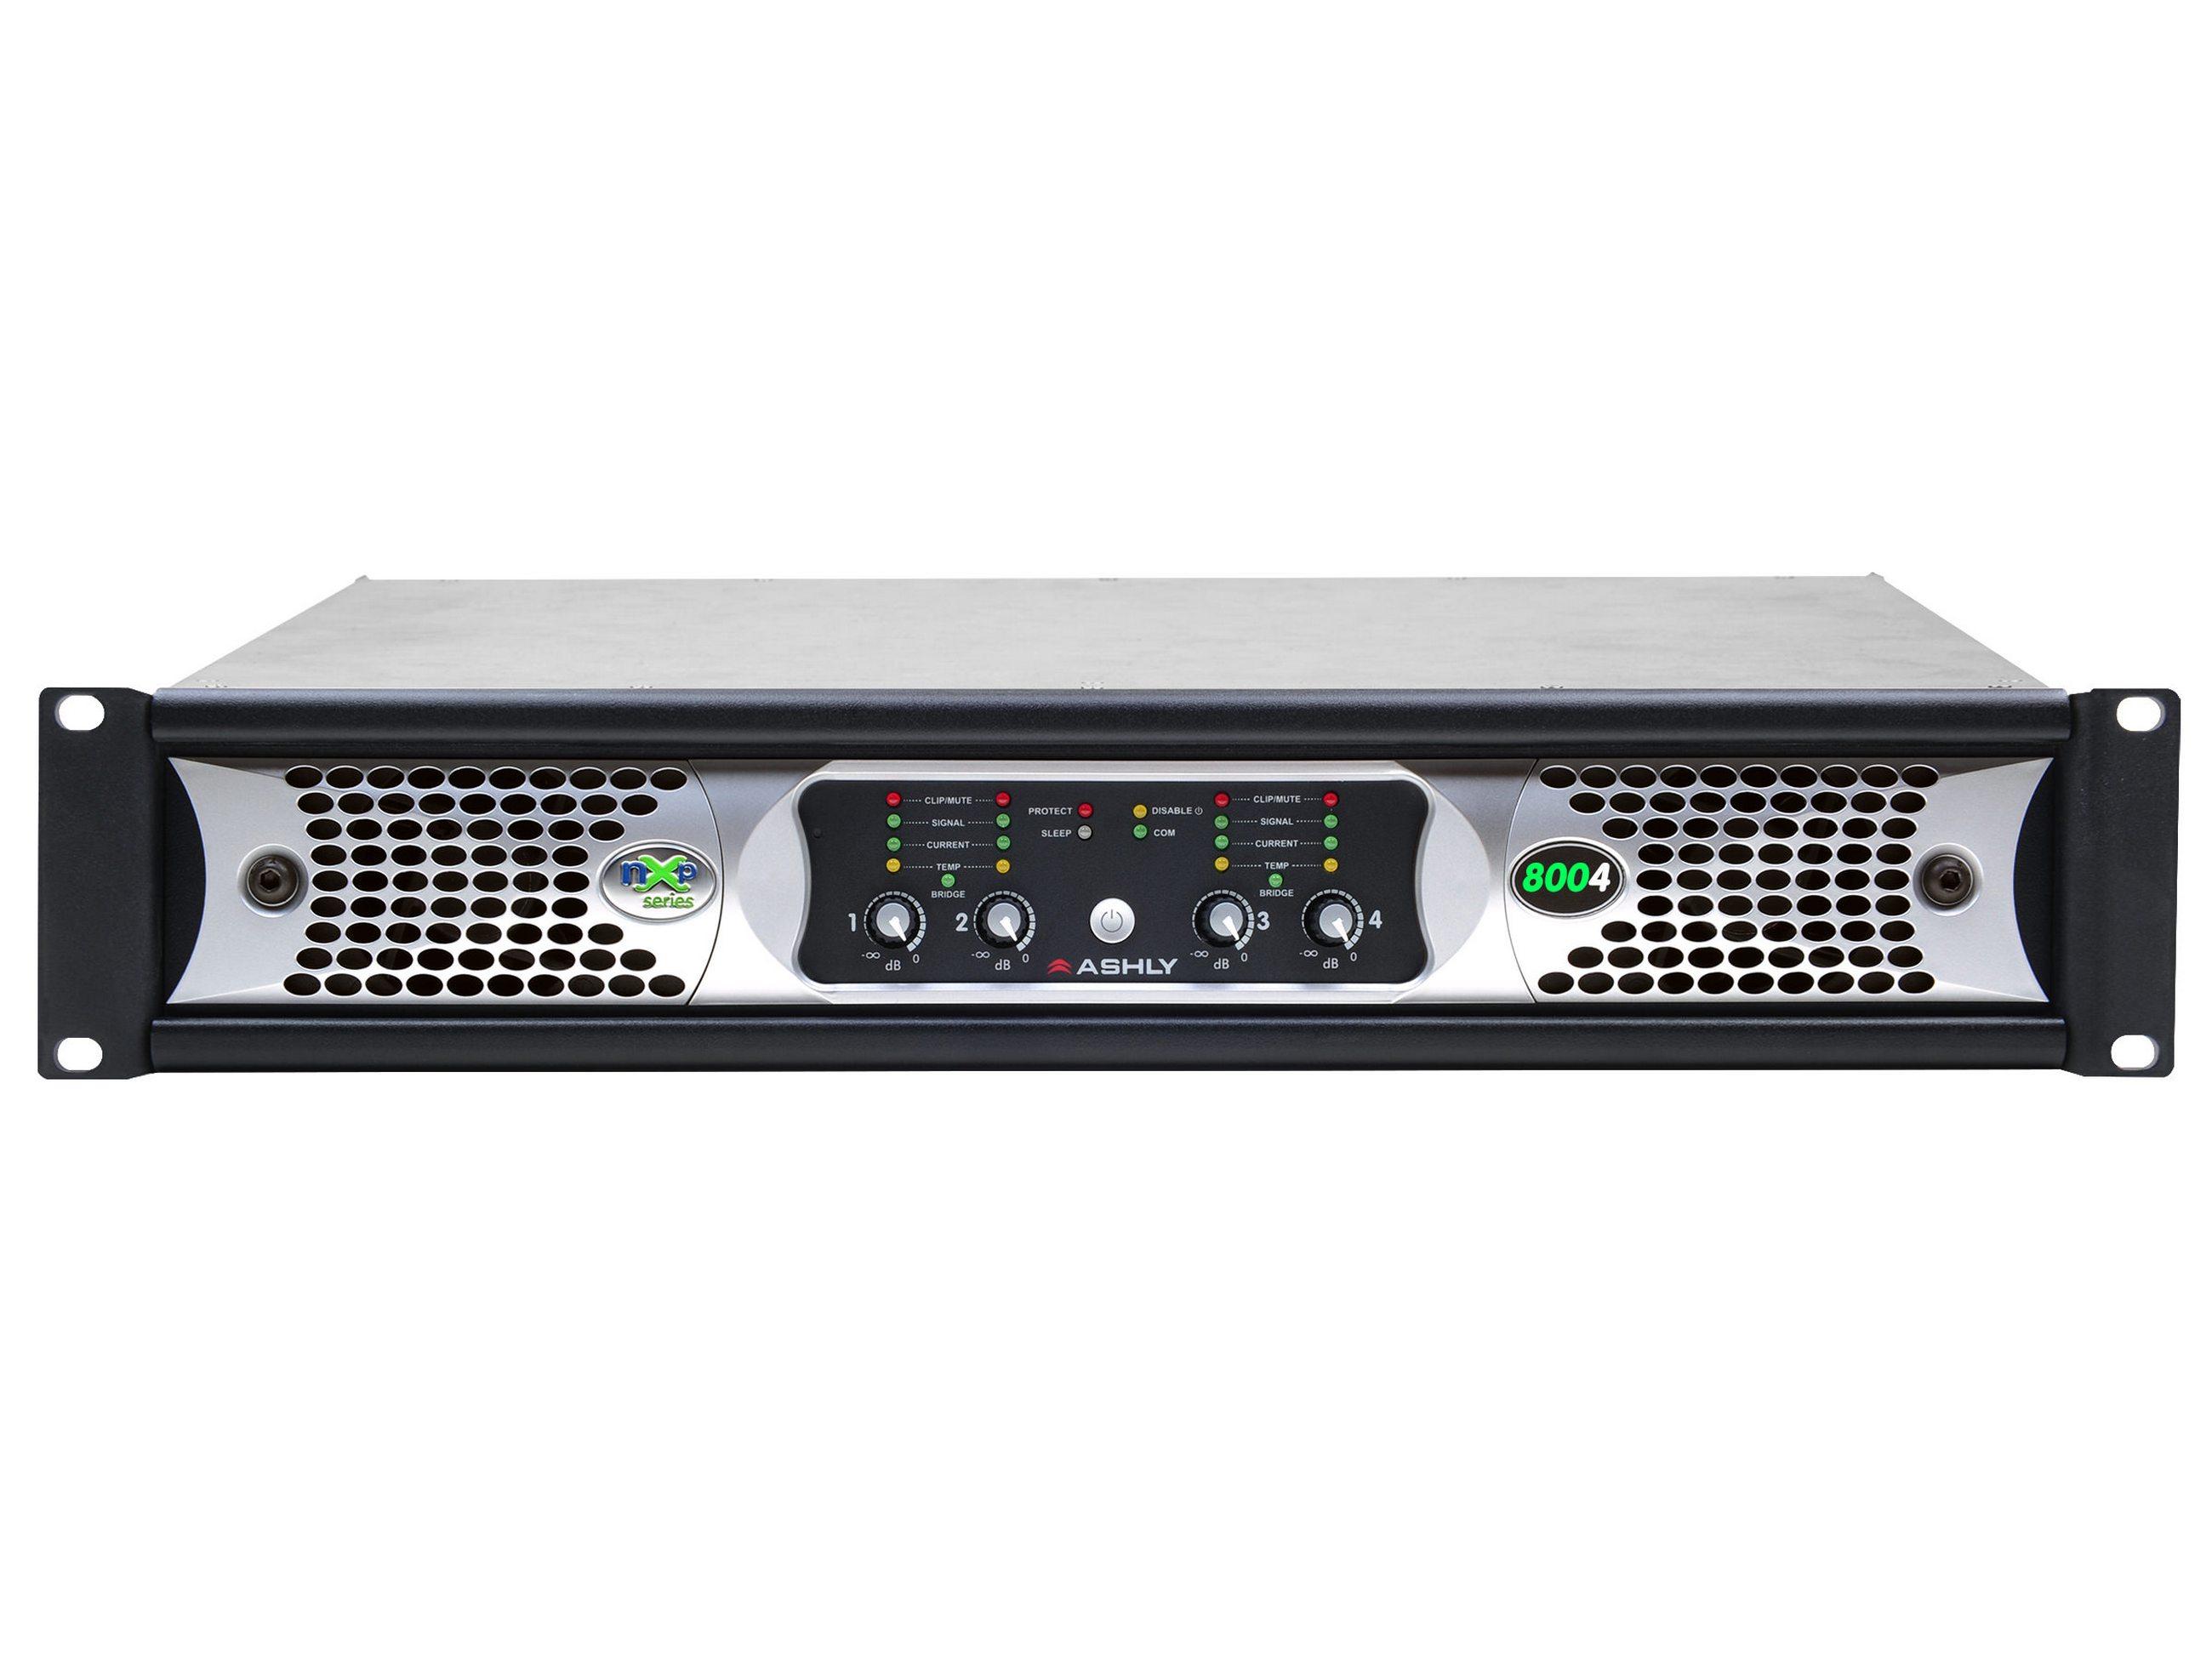 nXp8004d 4x 800 Watts/2 Ohms Network Power Amplifier with Protea DSP and OPDante Option Card by Ashly